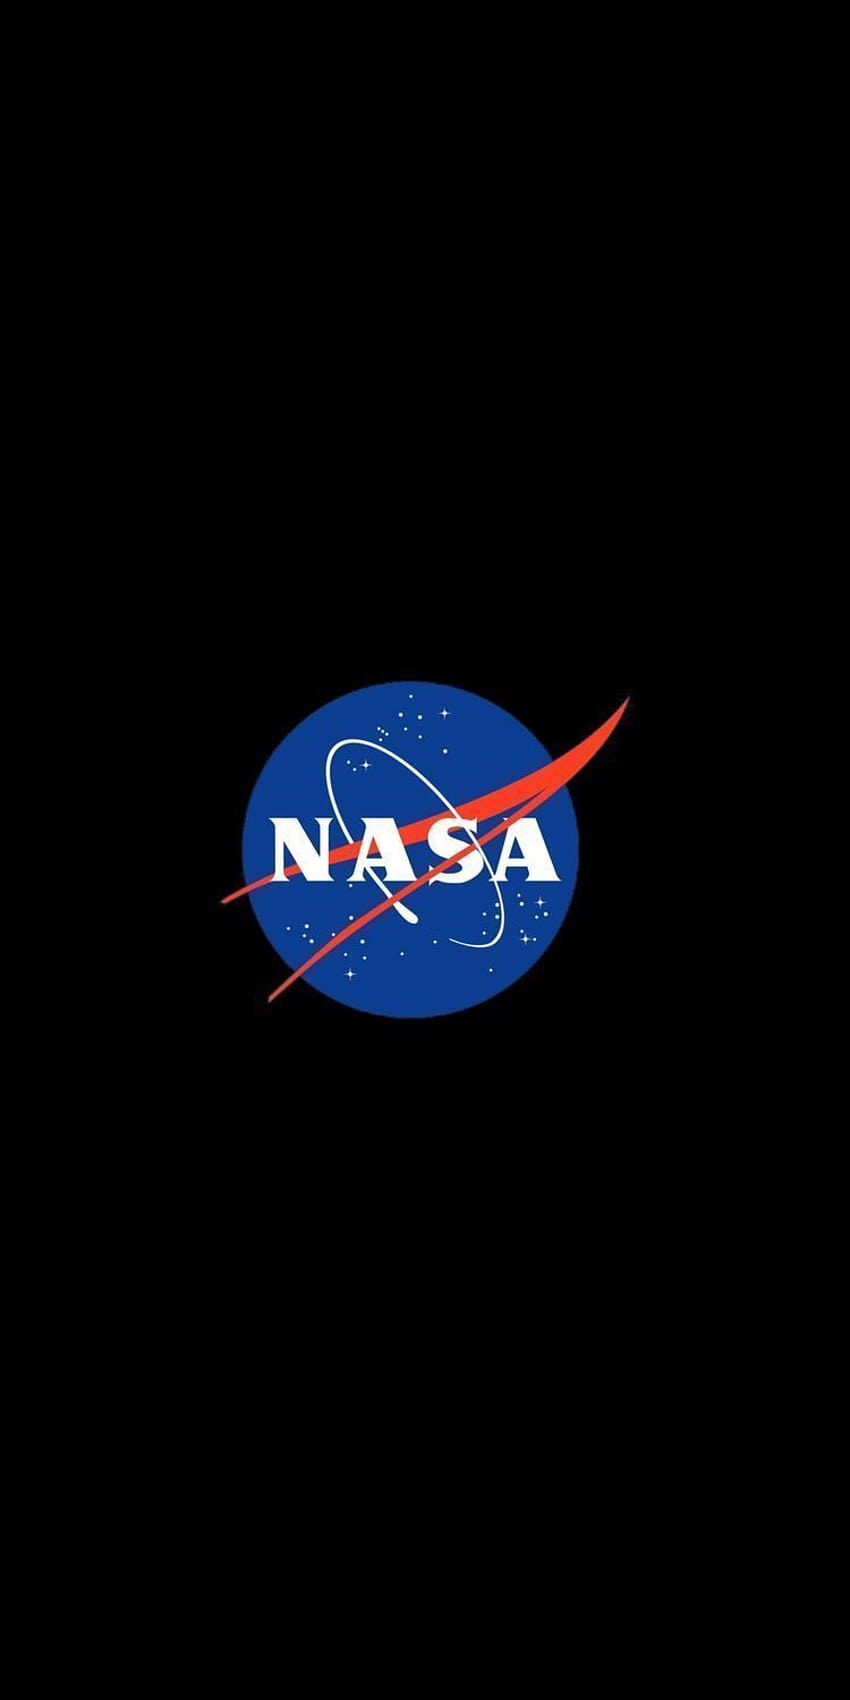 Latest List of Awesome Black Lock Screen for iPhone 11 Pro Max, nasa iphone 11 HD phone wallpaper